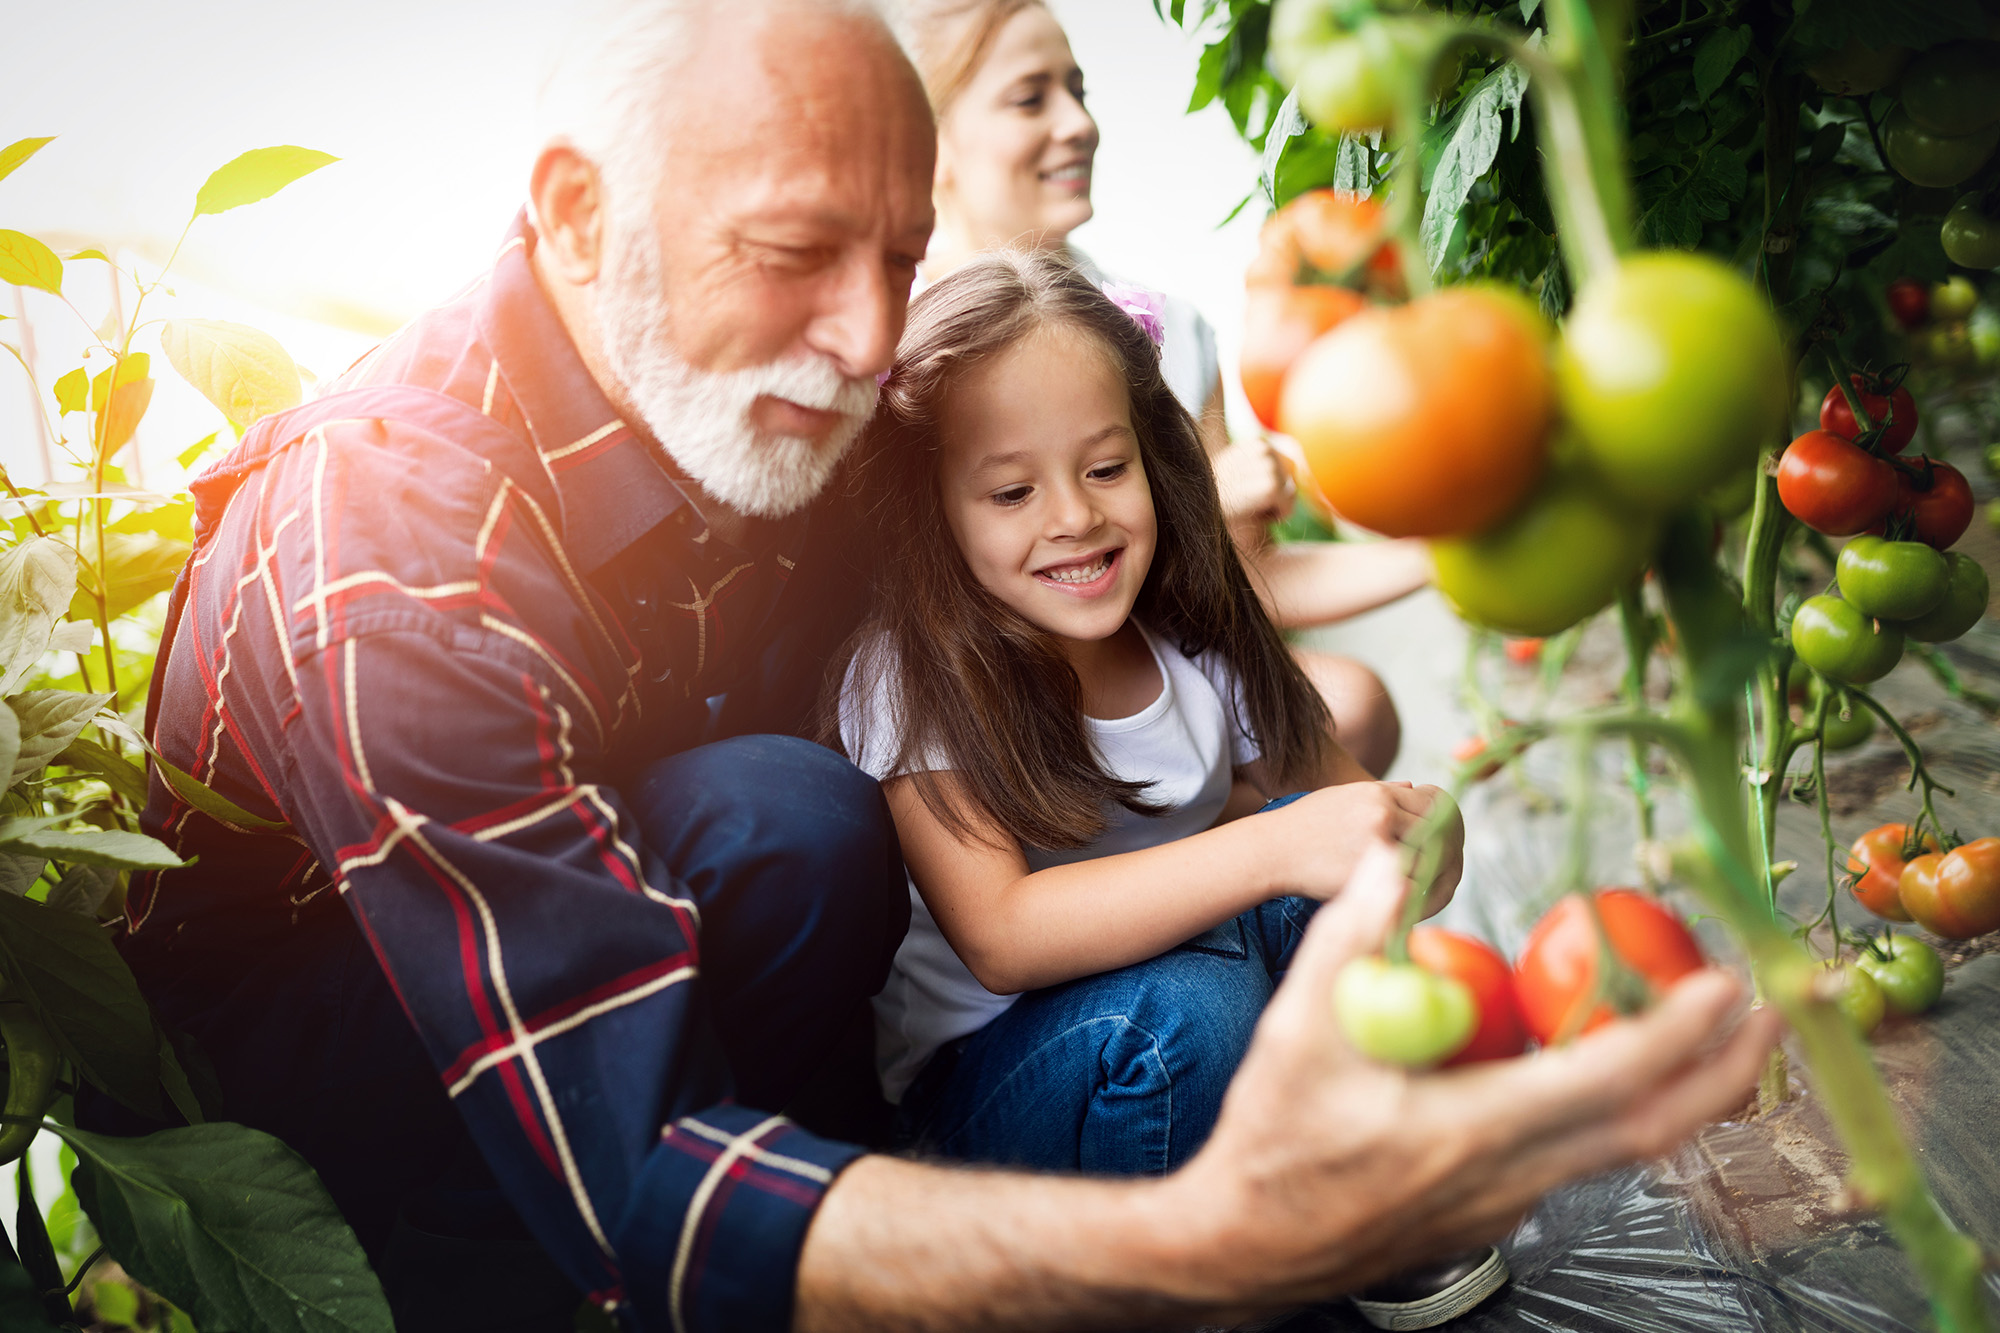 An older person picking tomatoes with a child. There are tomato plants full of fruits in the foreground.